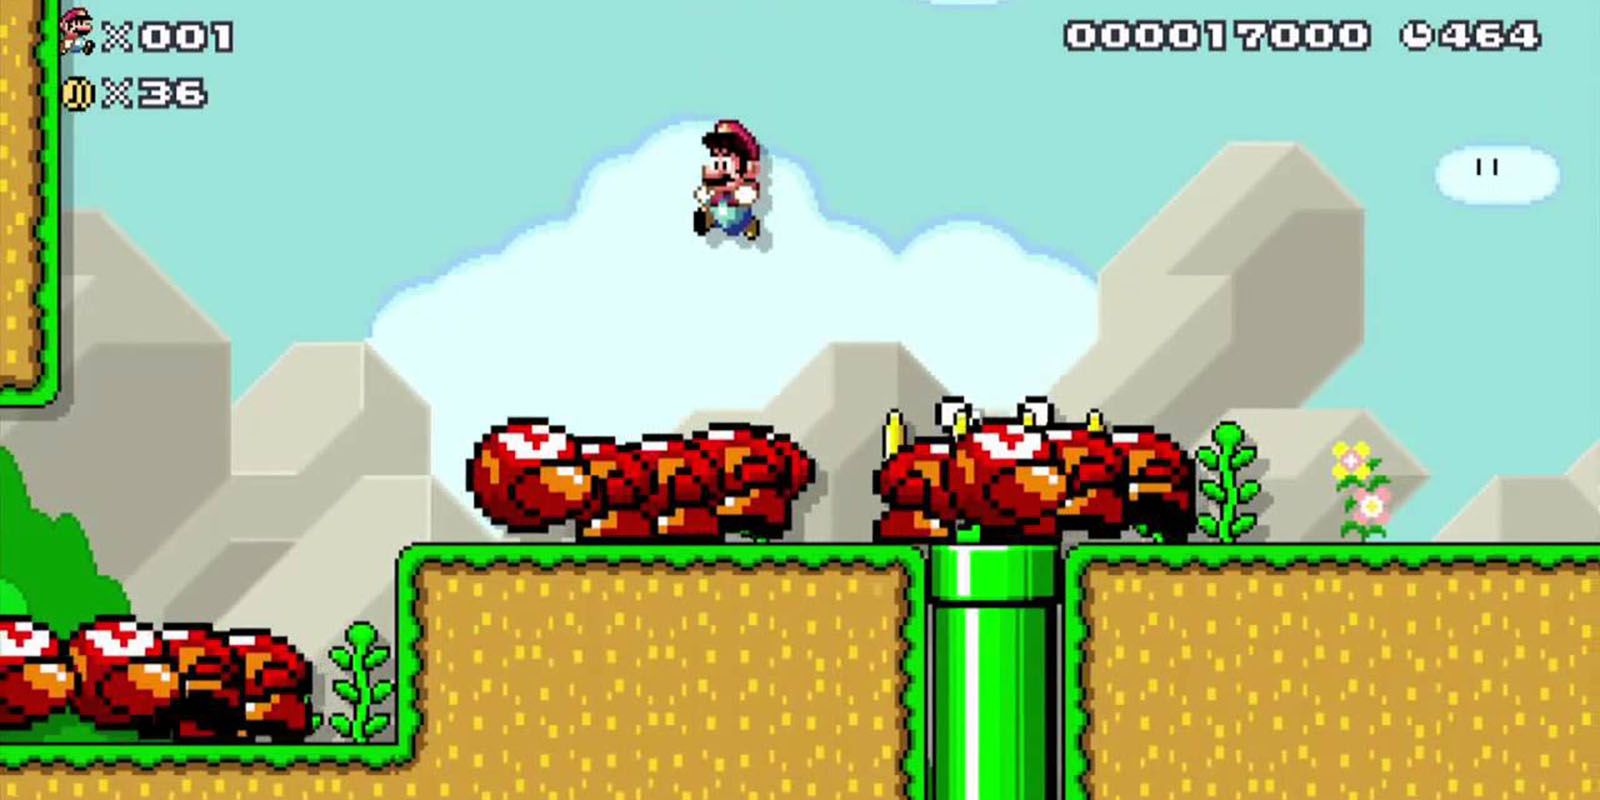 Mario jumping on top of an Angry Wiggler in Super Mario Maker